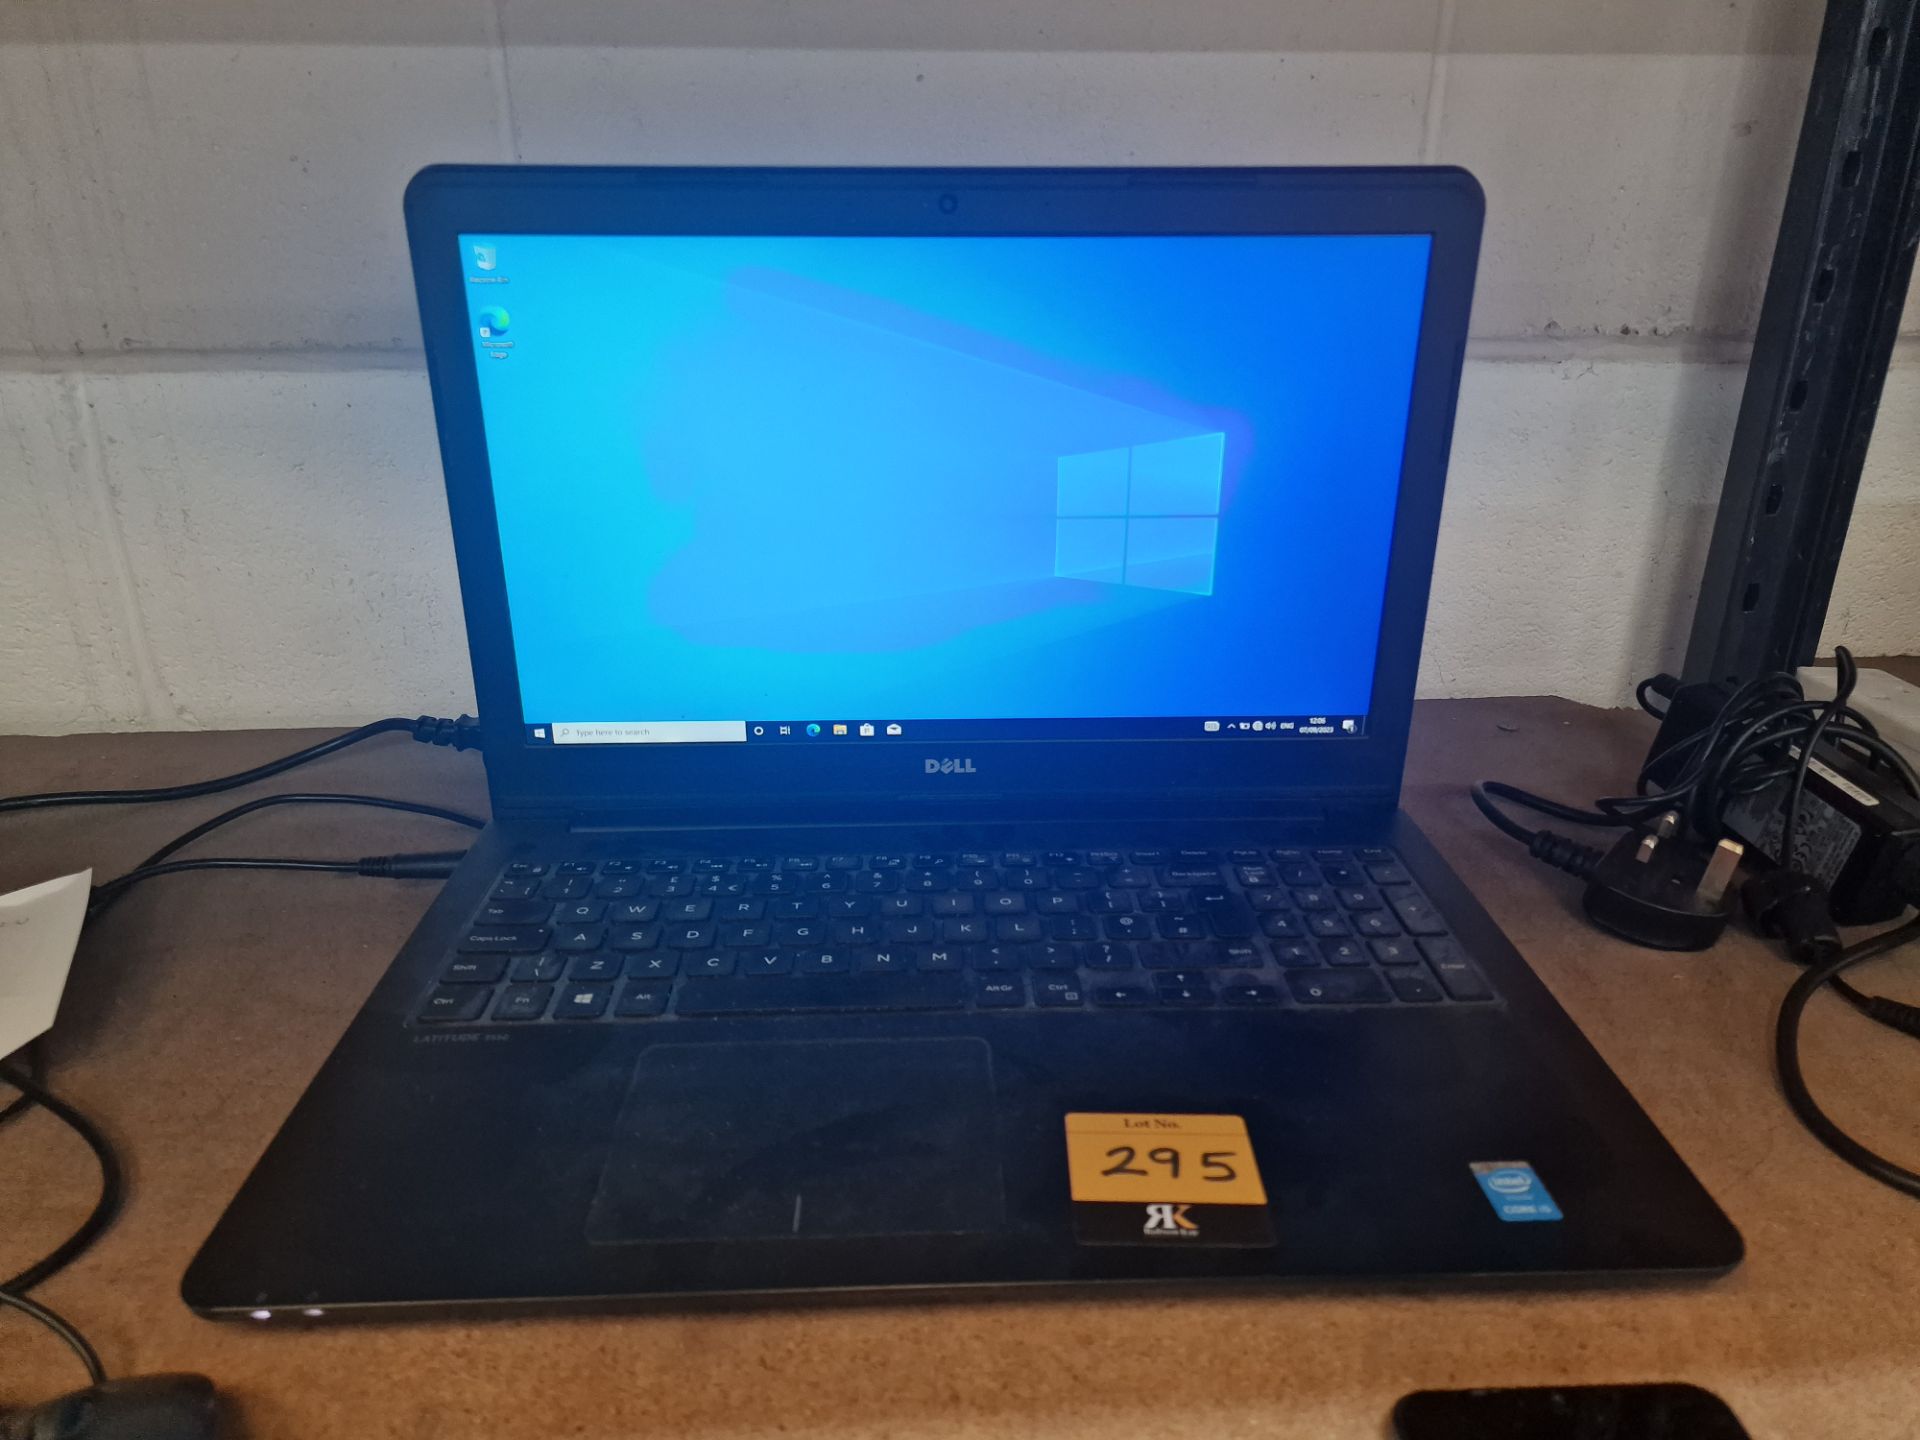 Dell Latitude 3550 notebook computer including powerpack/charger. With Intel Core i5-5200U processor